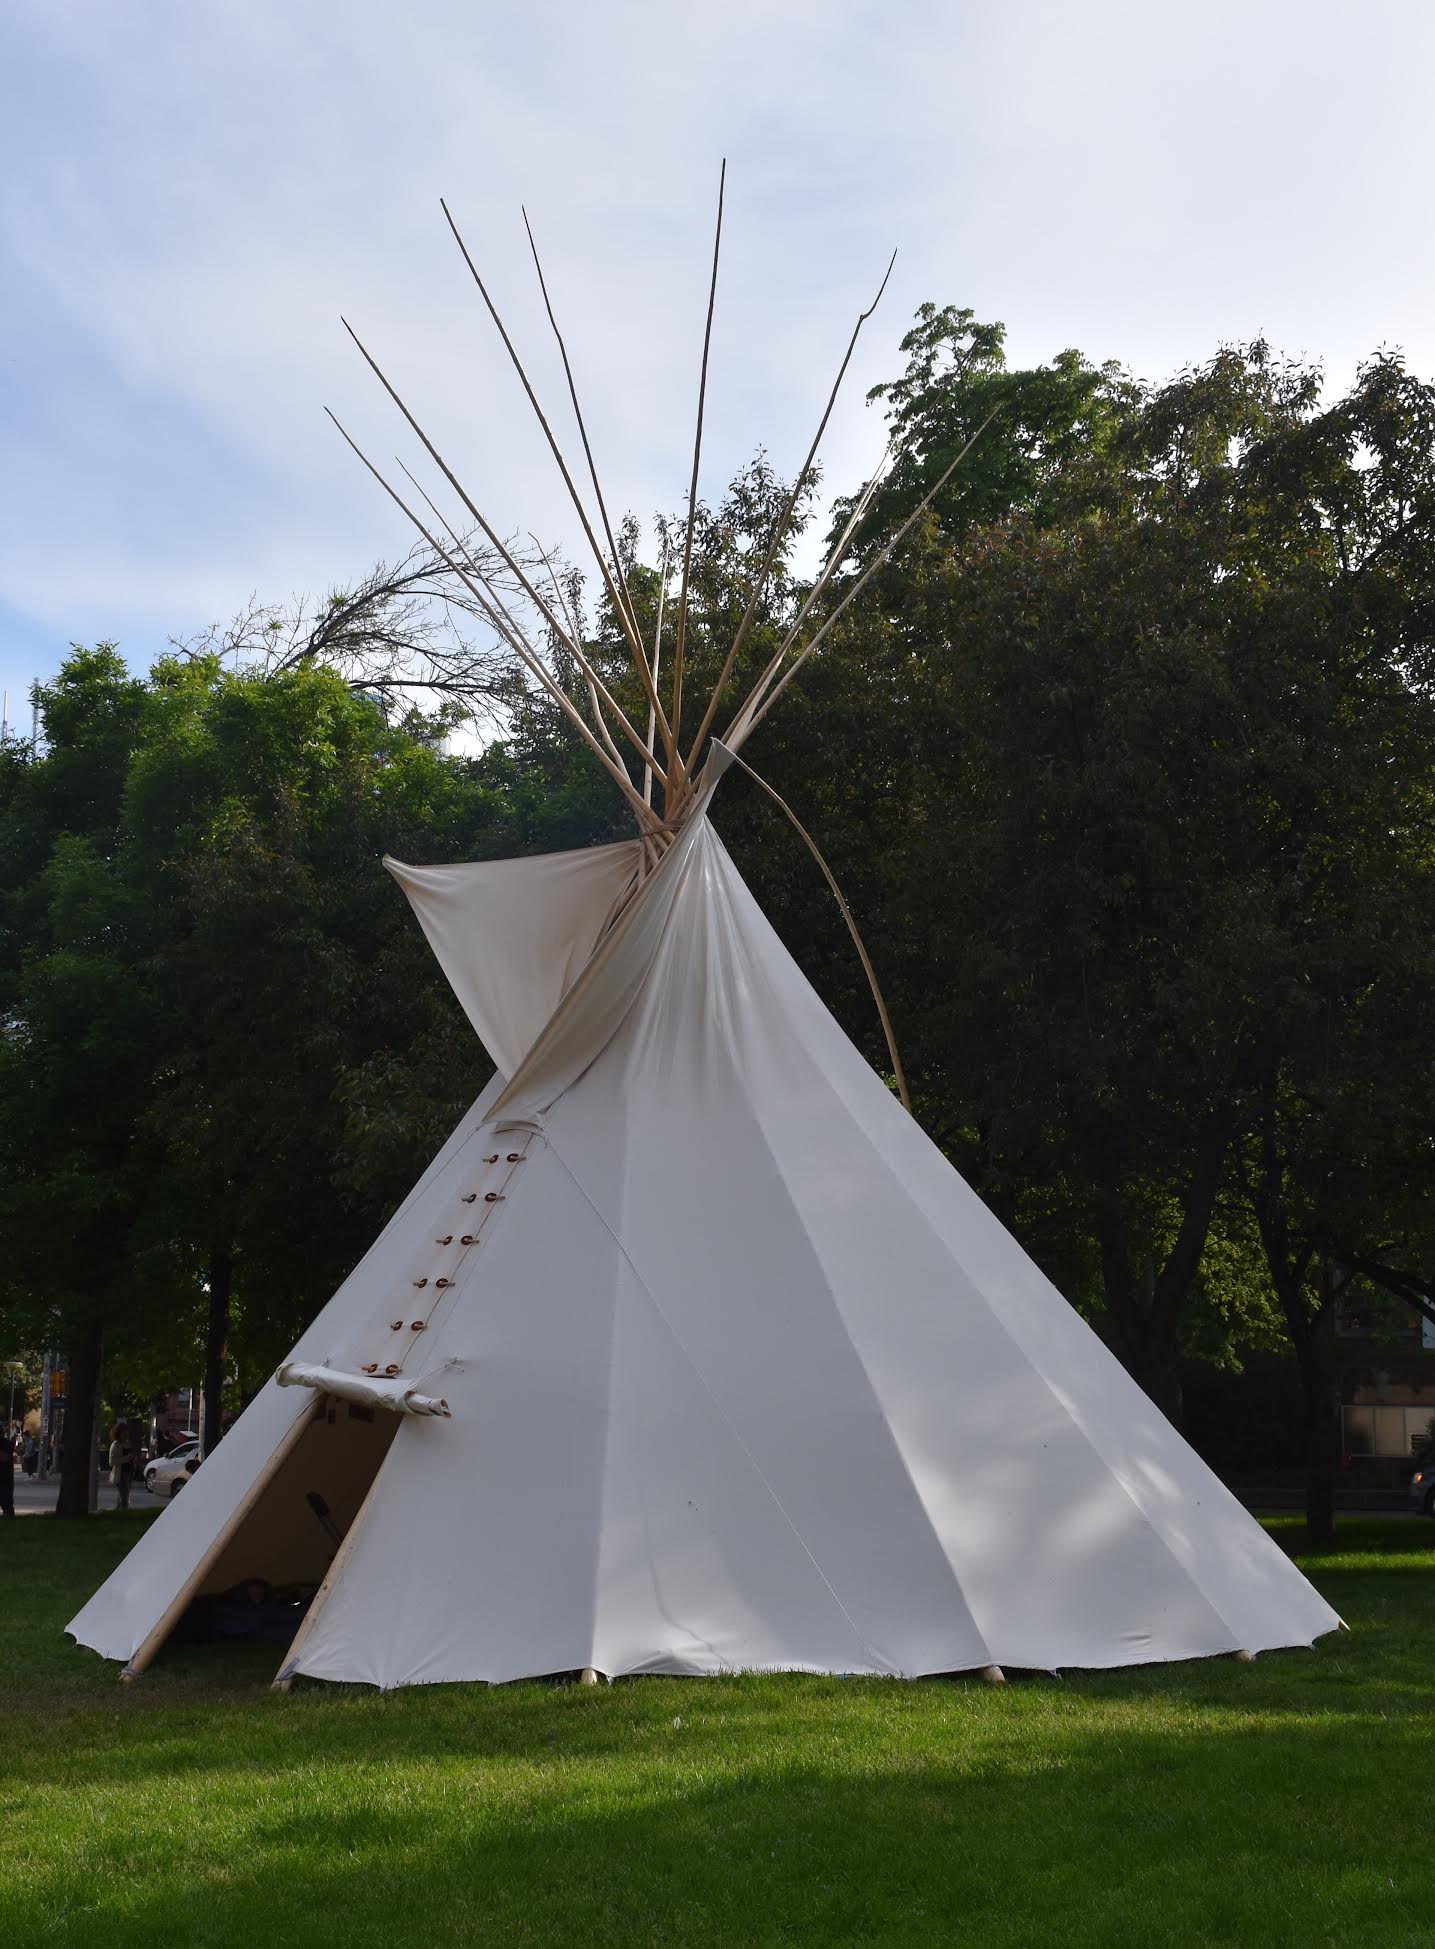 Teepee built for the Survival to Sovereignty Exhibition 